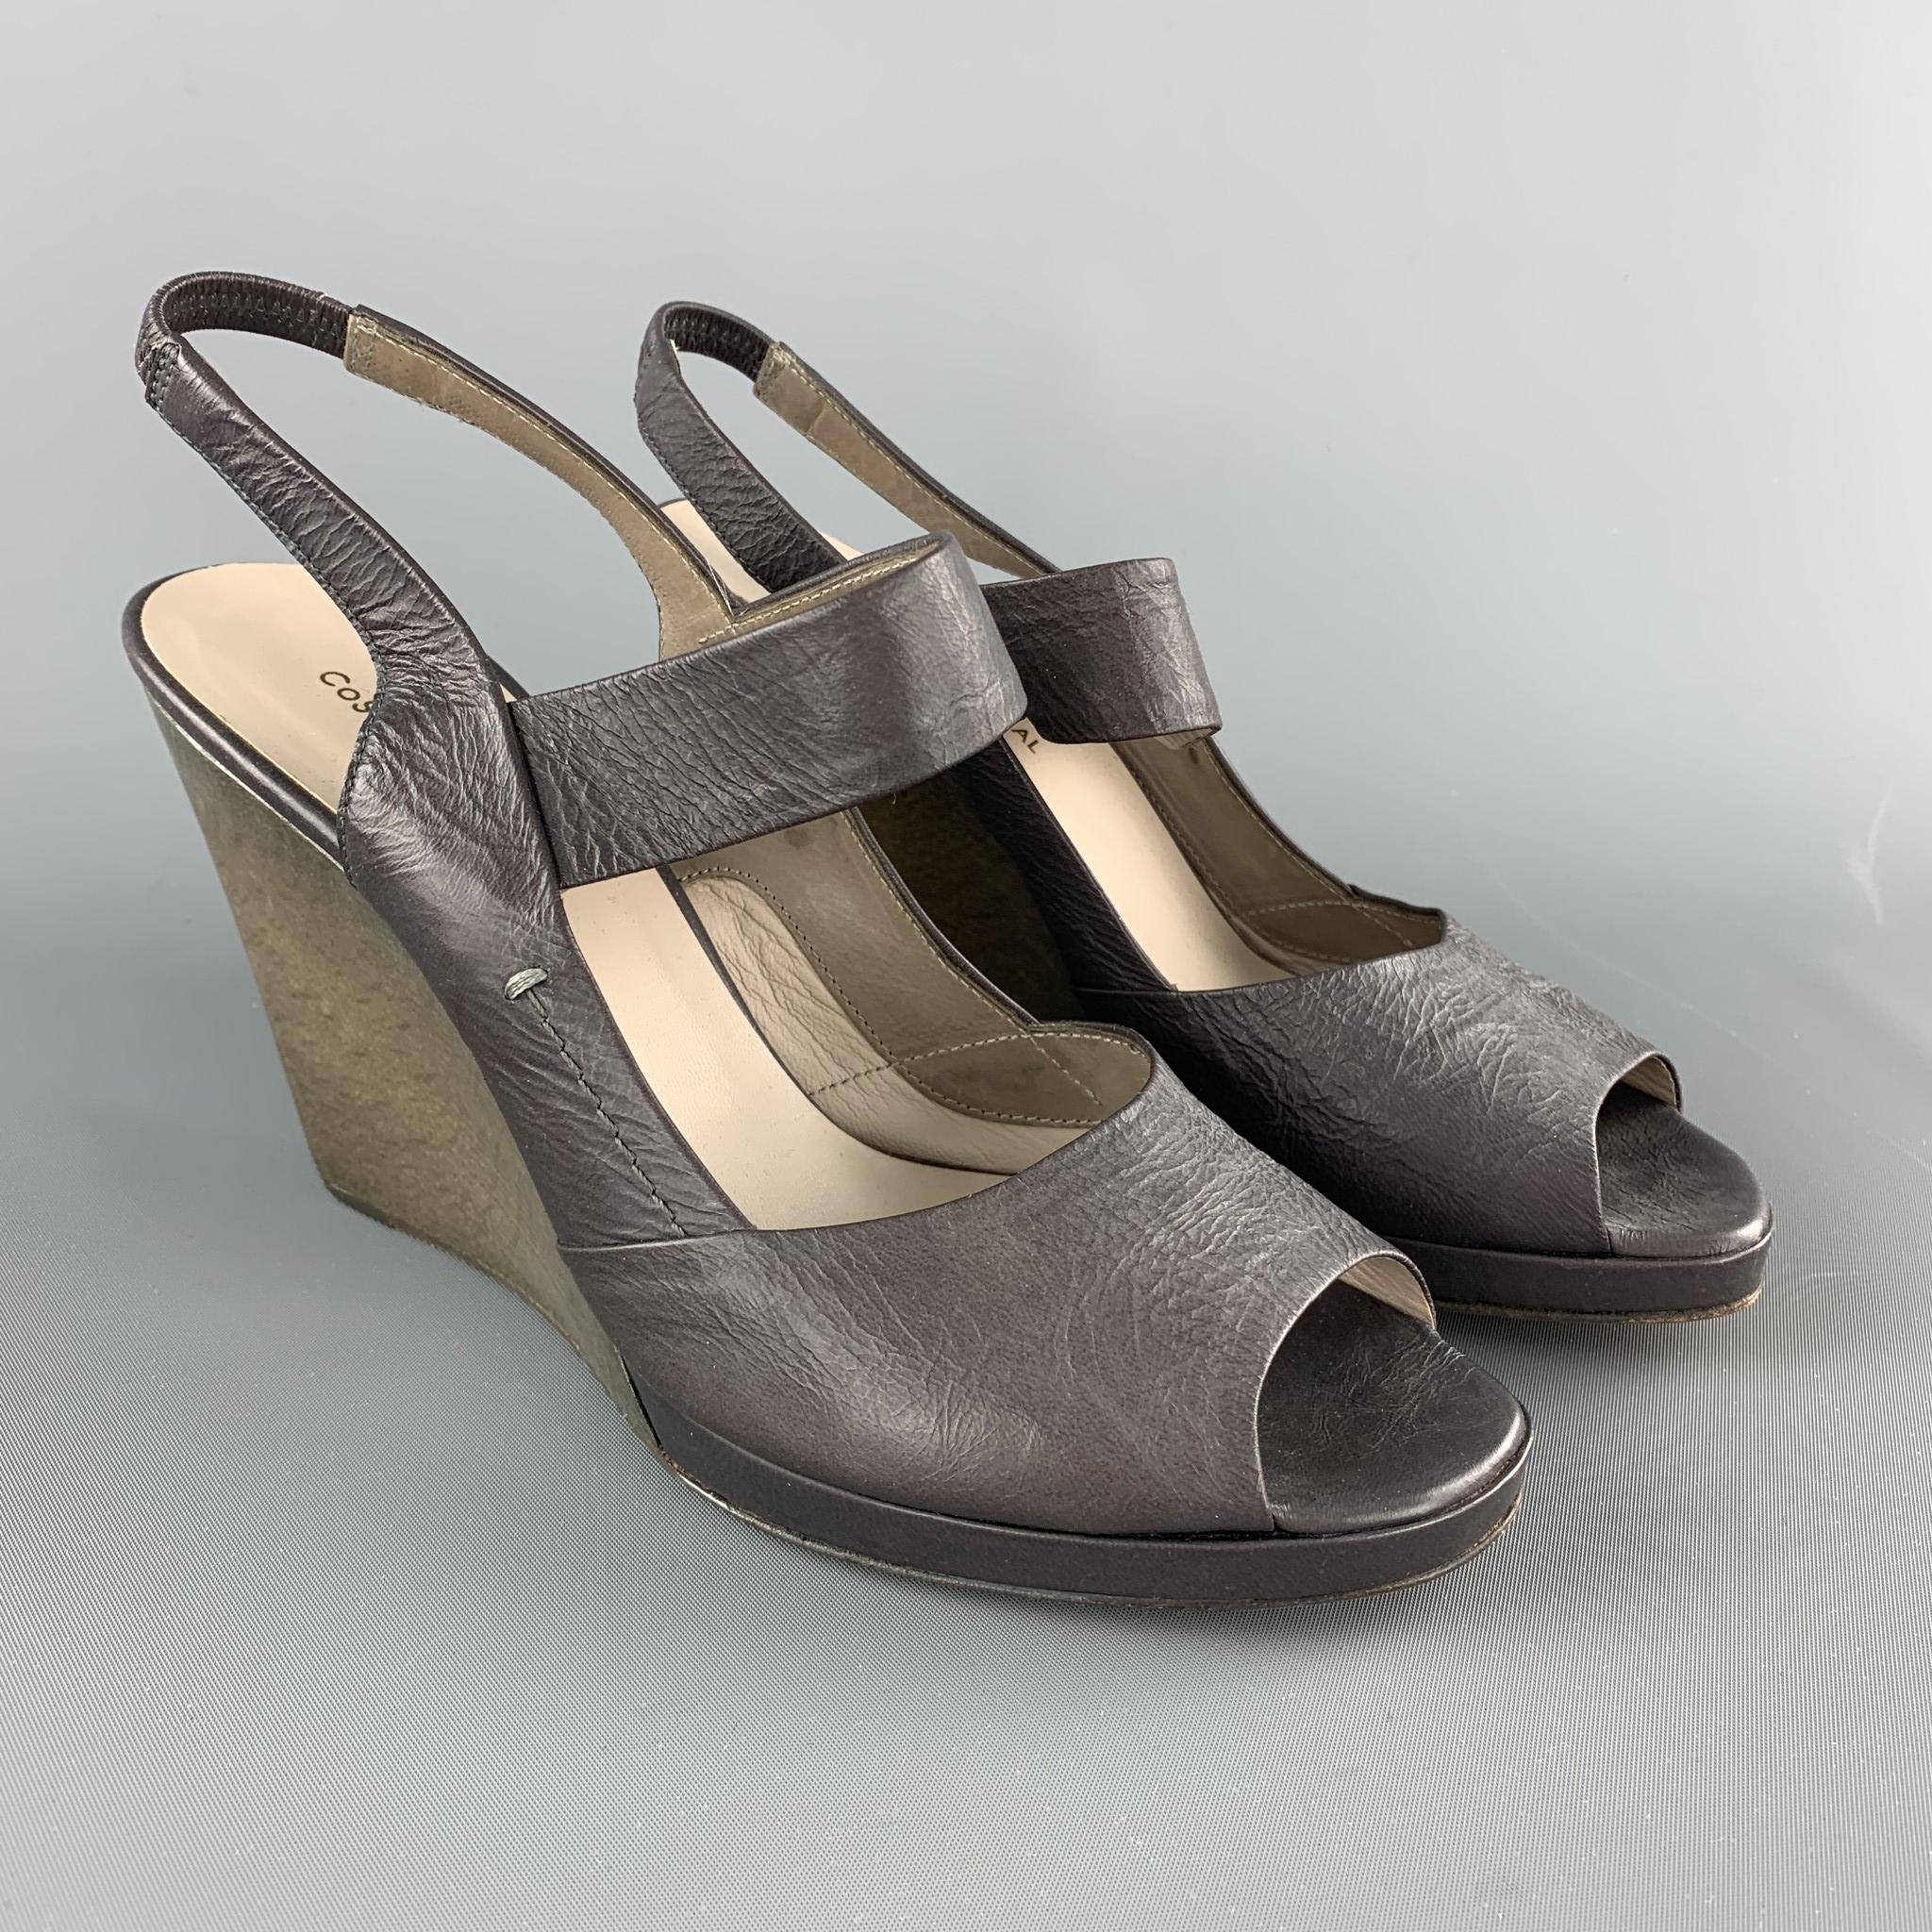 CoSTUME NATIONAL sandals come in grey leather with a Mary jane strap, slingback, and low platform, wedge sole. Made in Italy.

New without Tags.
Marked: IT 37.5

Heel: 4 in.
Platform: 0.5 in.
SKU: 101793
Category: Sandals

More Details
Brand: